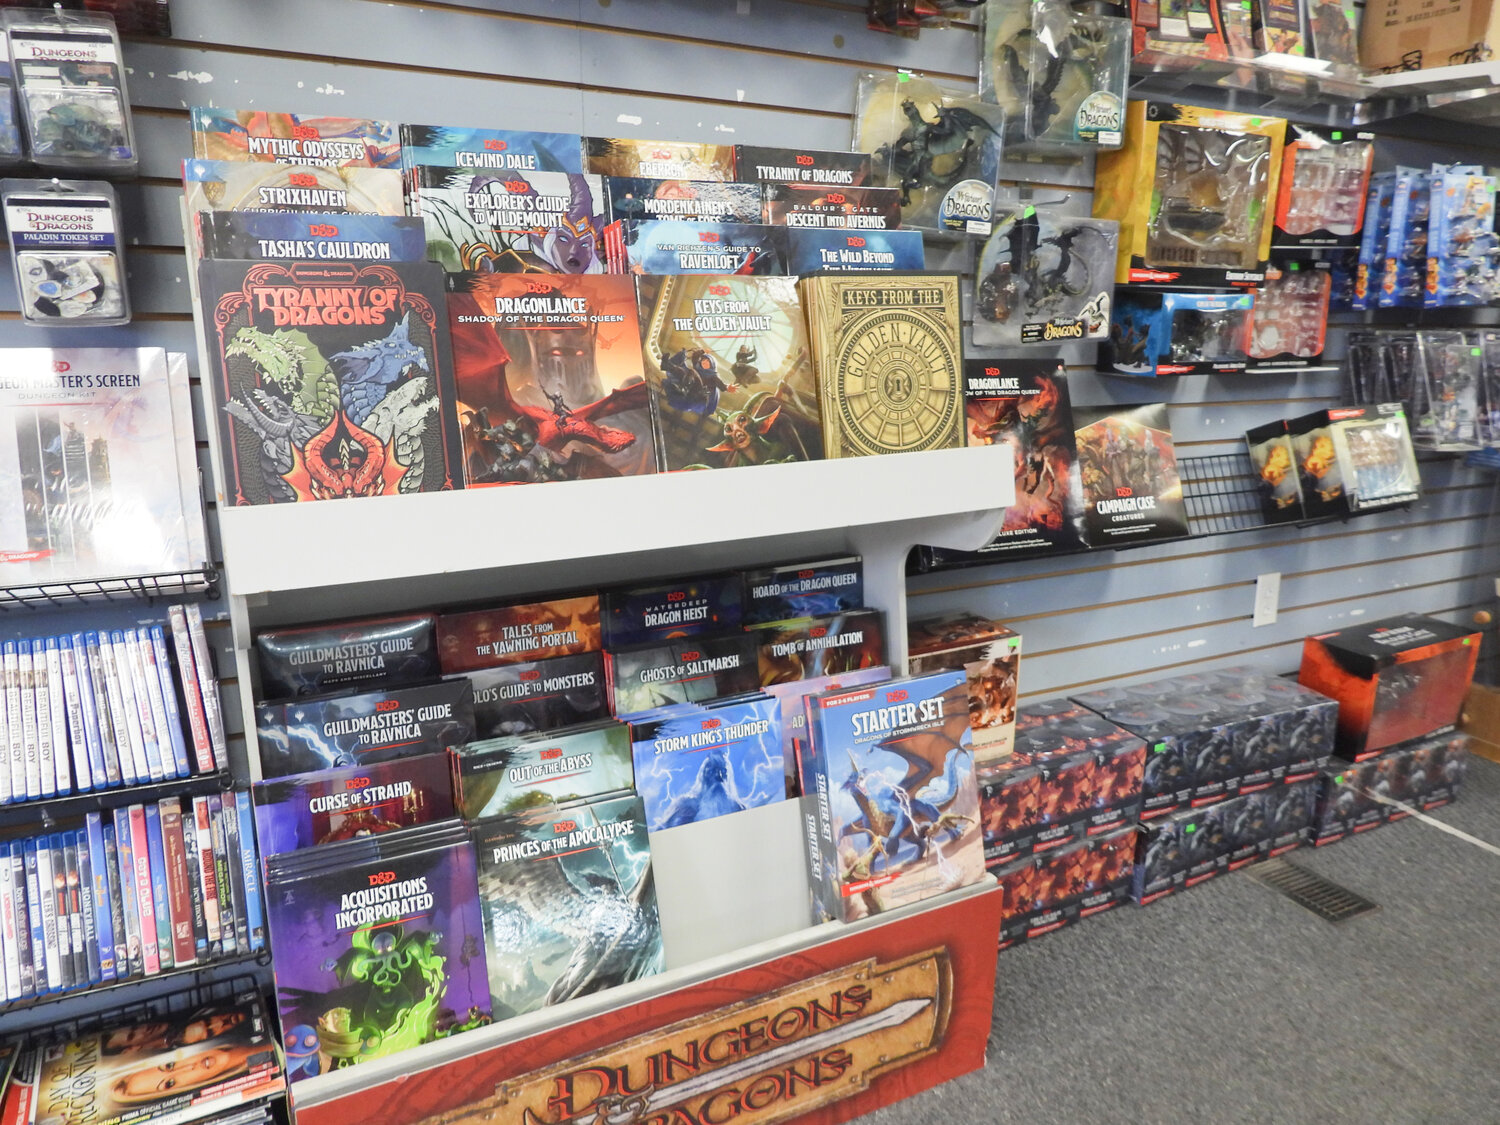 Games People Play is a gaming store that sells a little bit of everything. Pictured are a number of Dungeons and Dragons books.